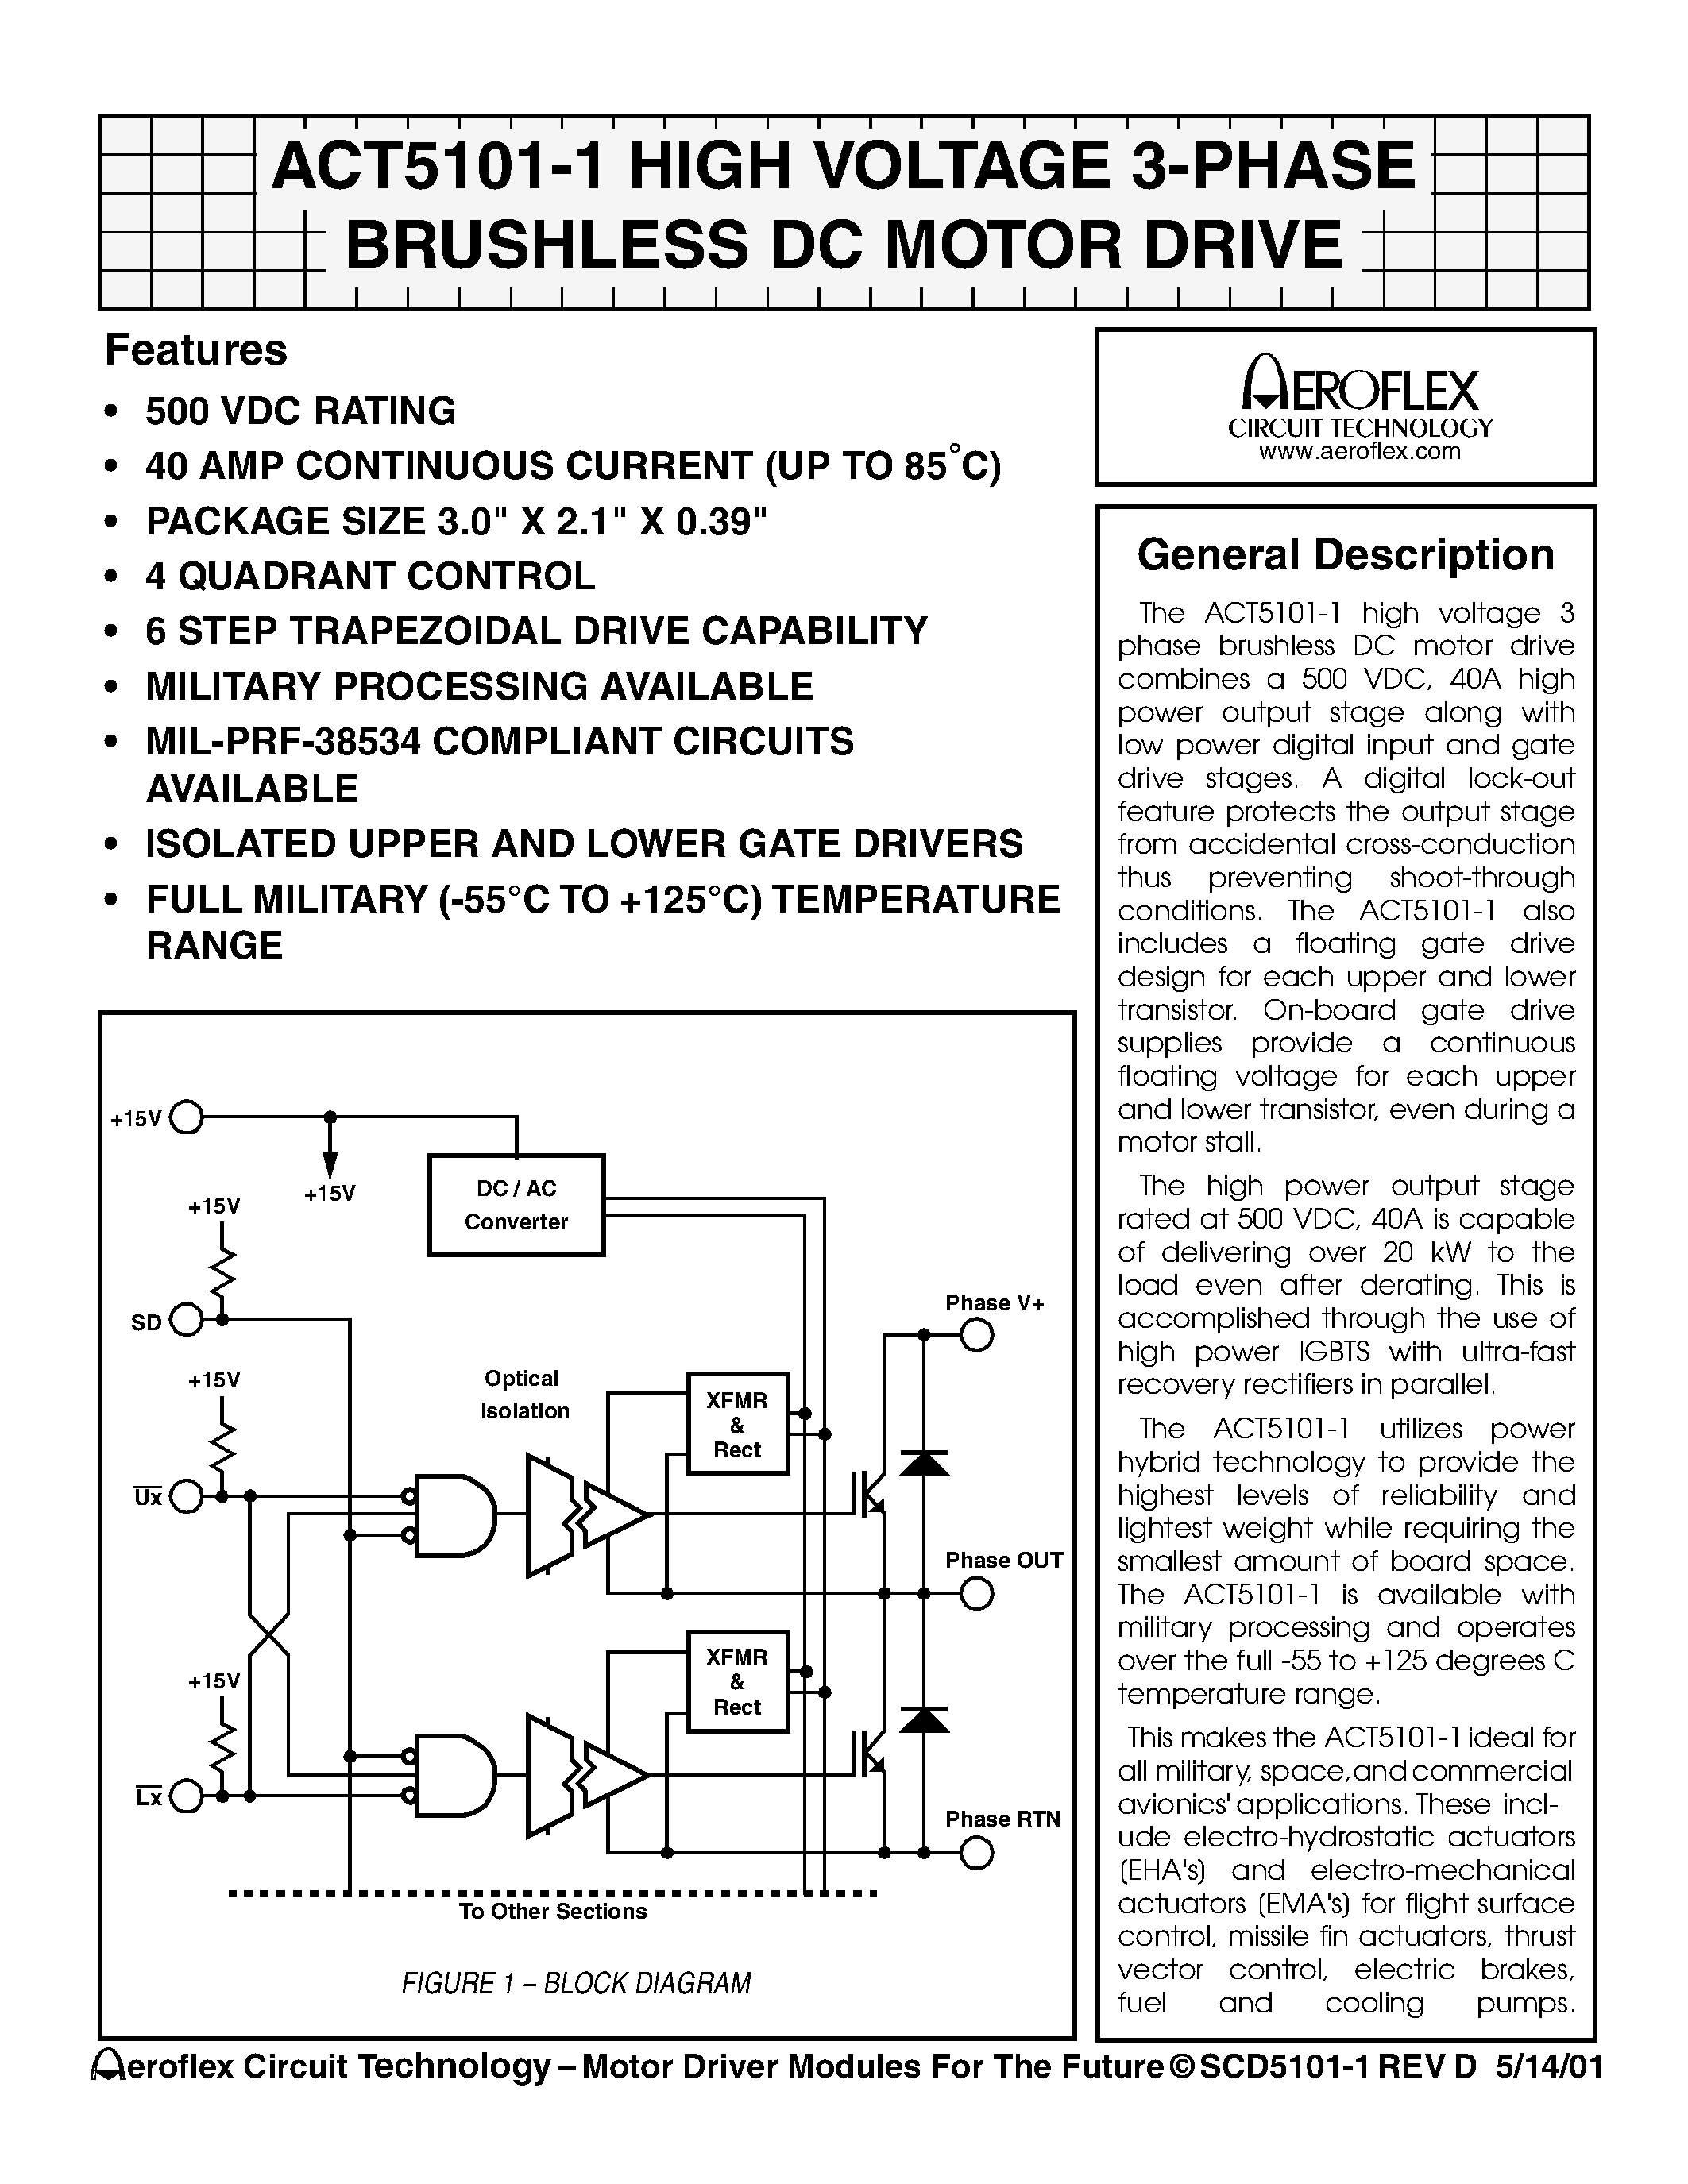 Datasheet ACT5101-1 - ACT5101-1 HIGH VOLTAGE 3-PHASE BRUSHLESS DC MOTOR DRIVE page 1